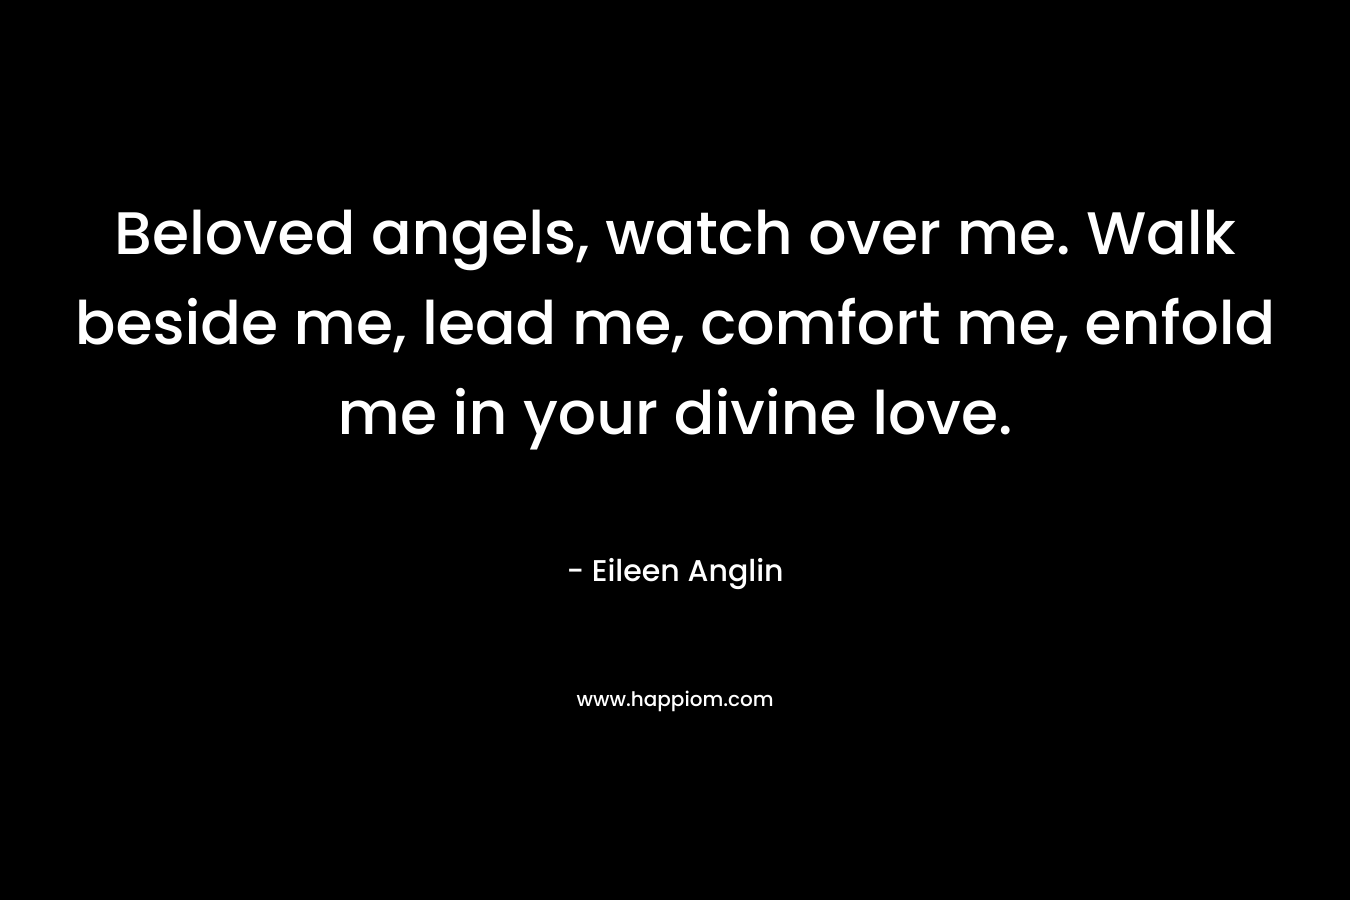 Beloved angels, watch over me. Walk beside me, lead me, comfort me, enfold me in your divine love. – Eileen Anglin